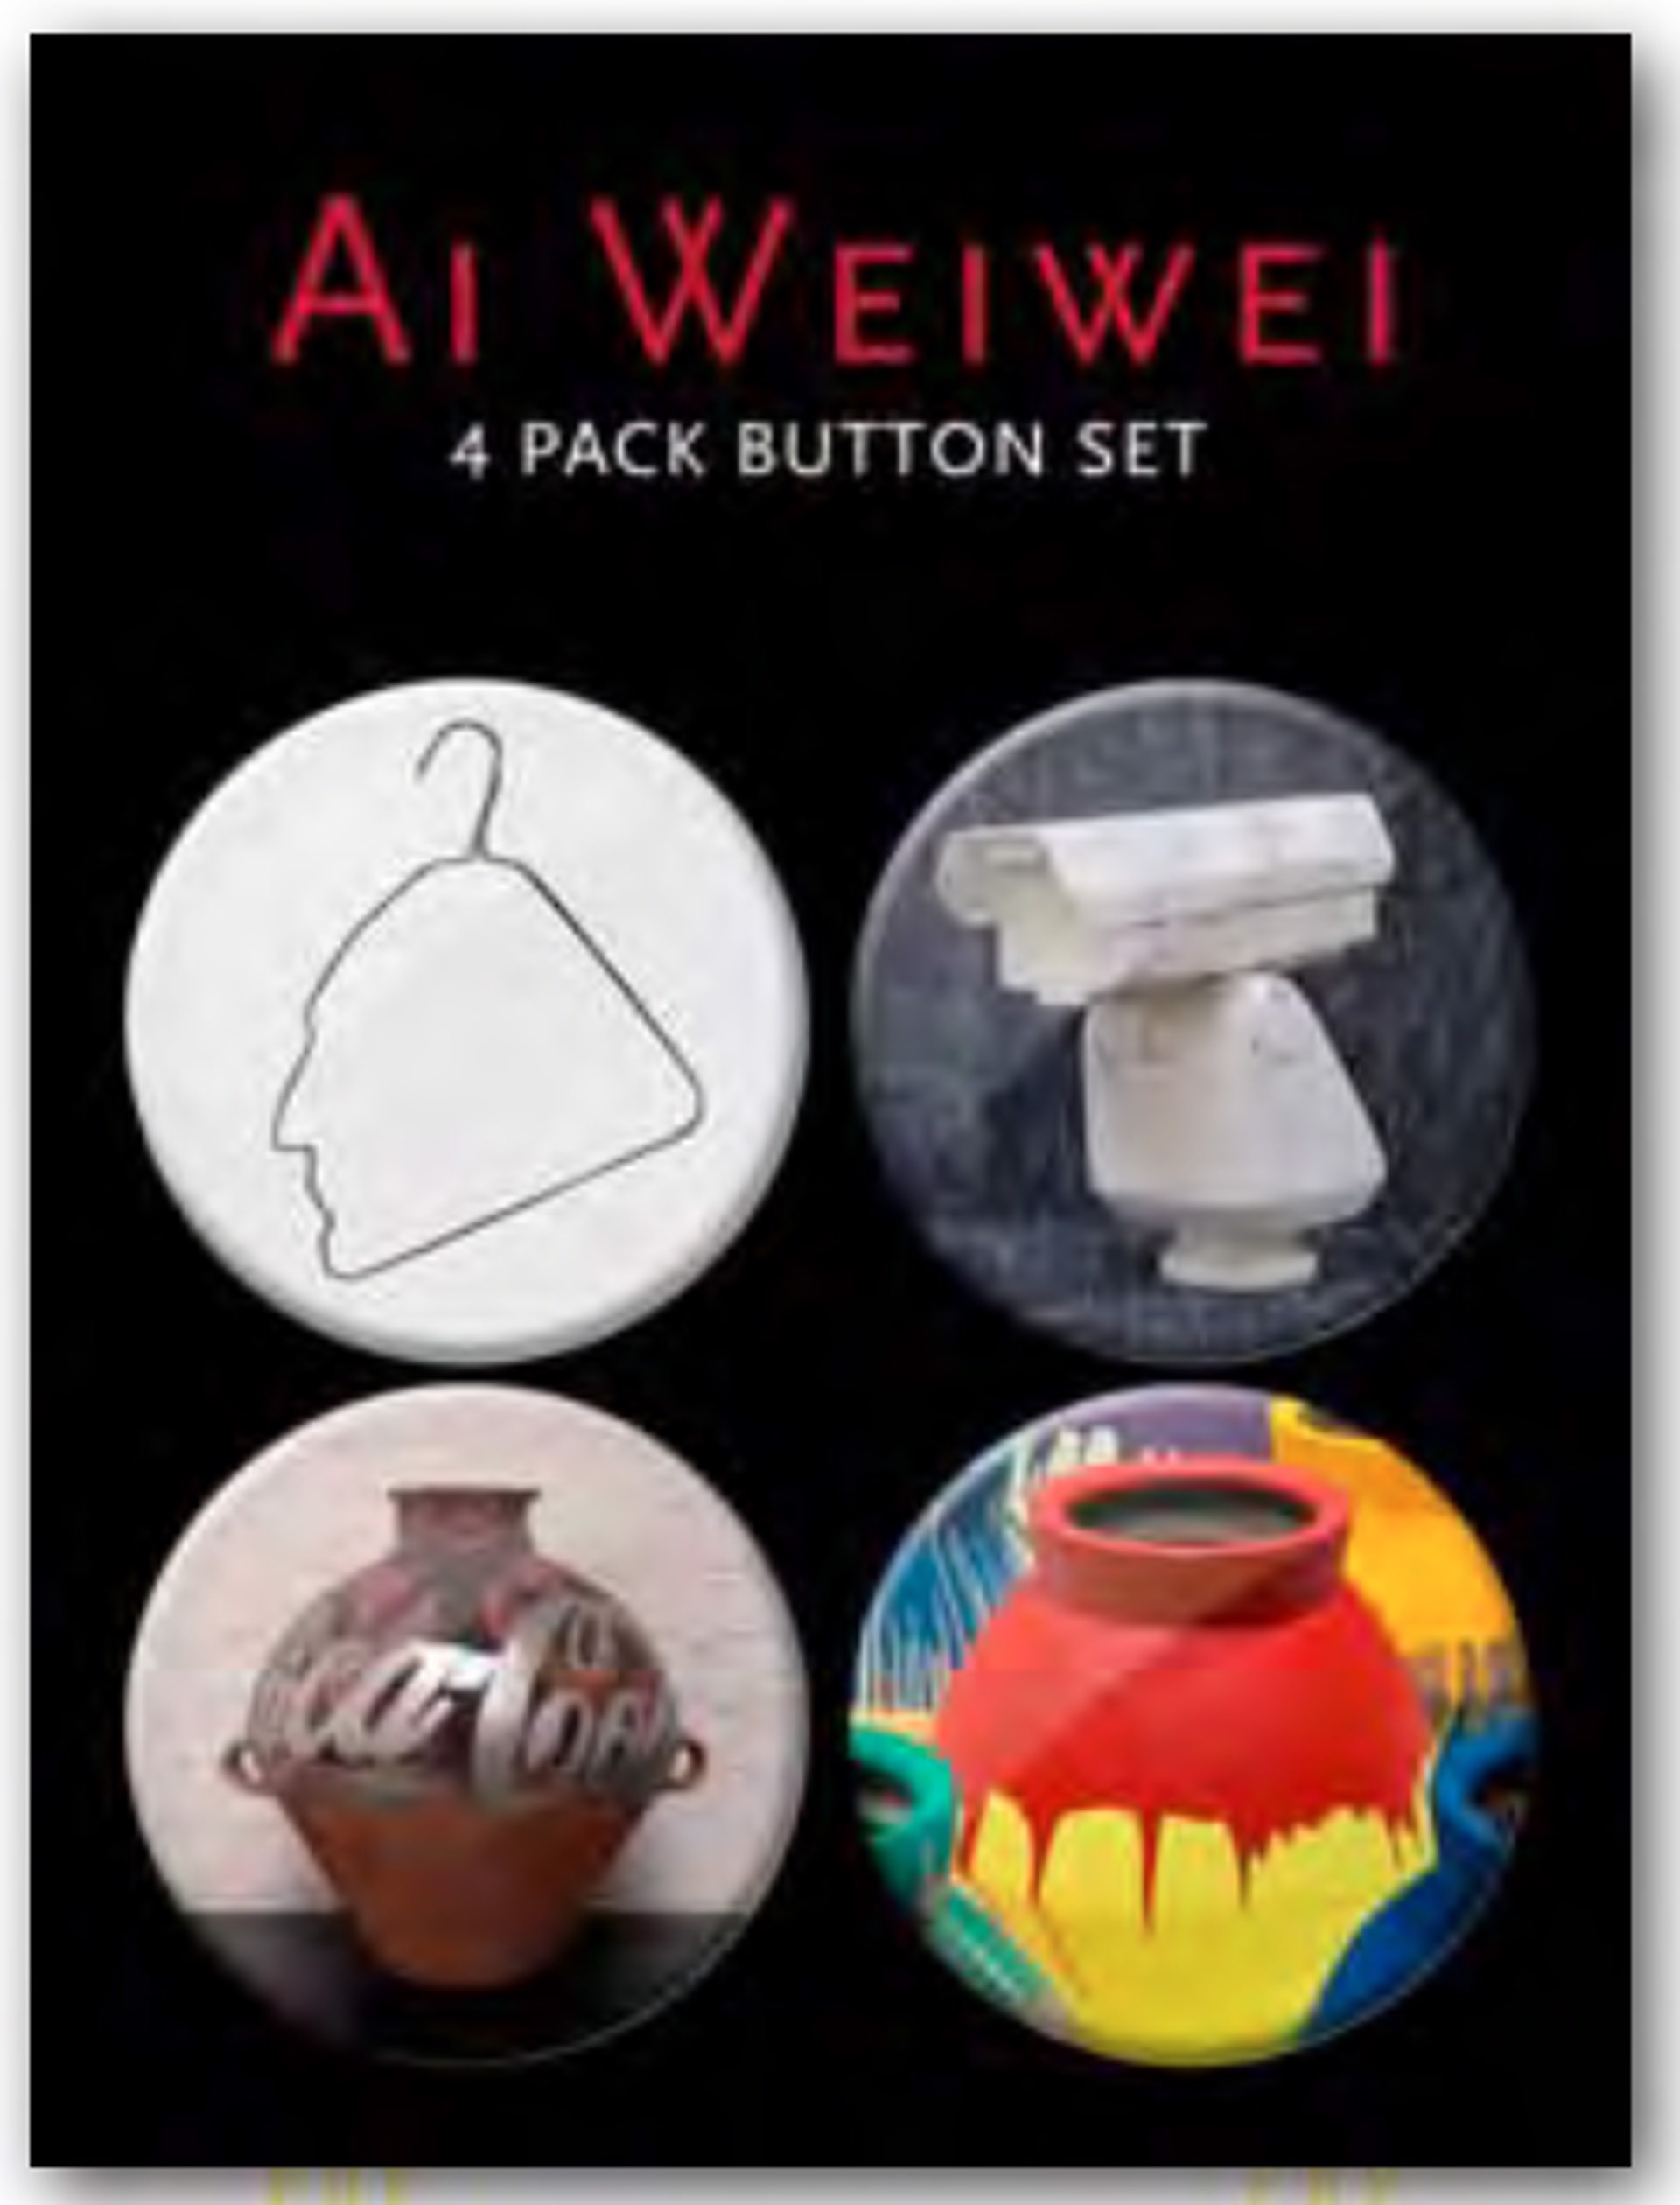 Works of Art Button 4-Pack by Ai Weiwei